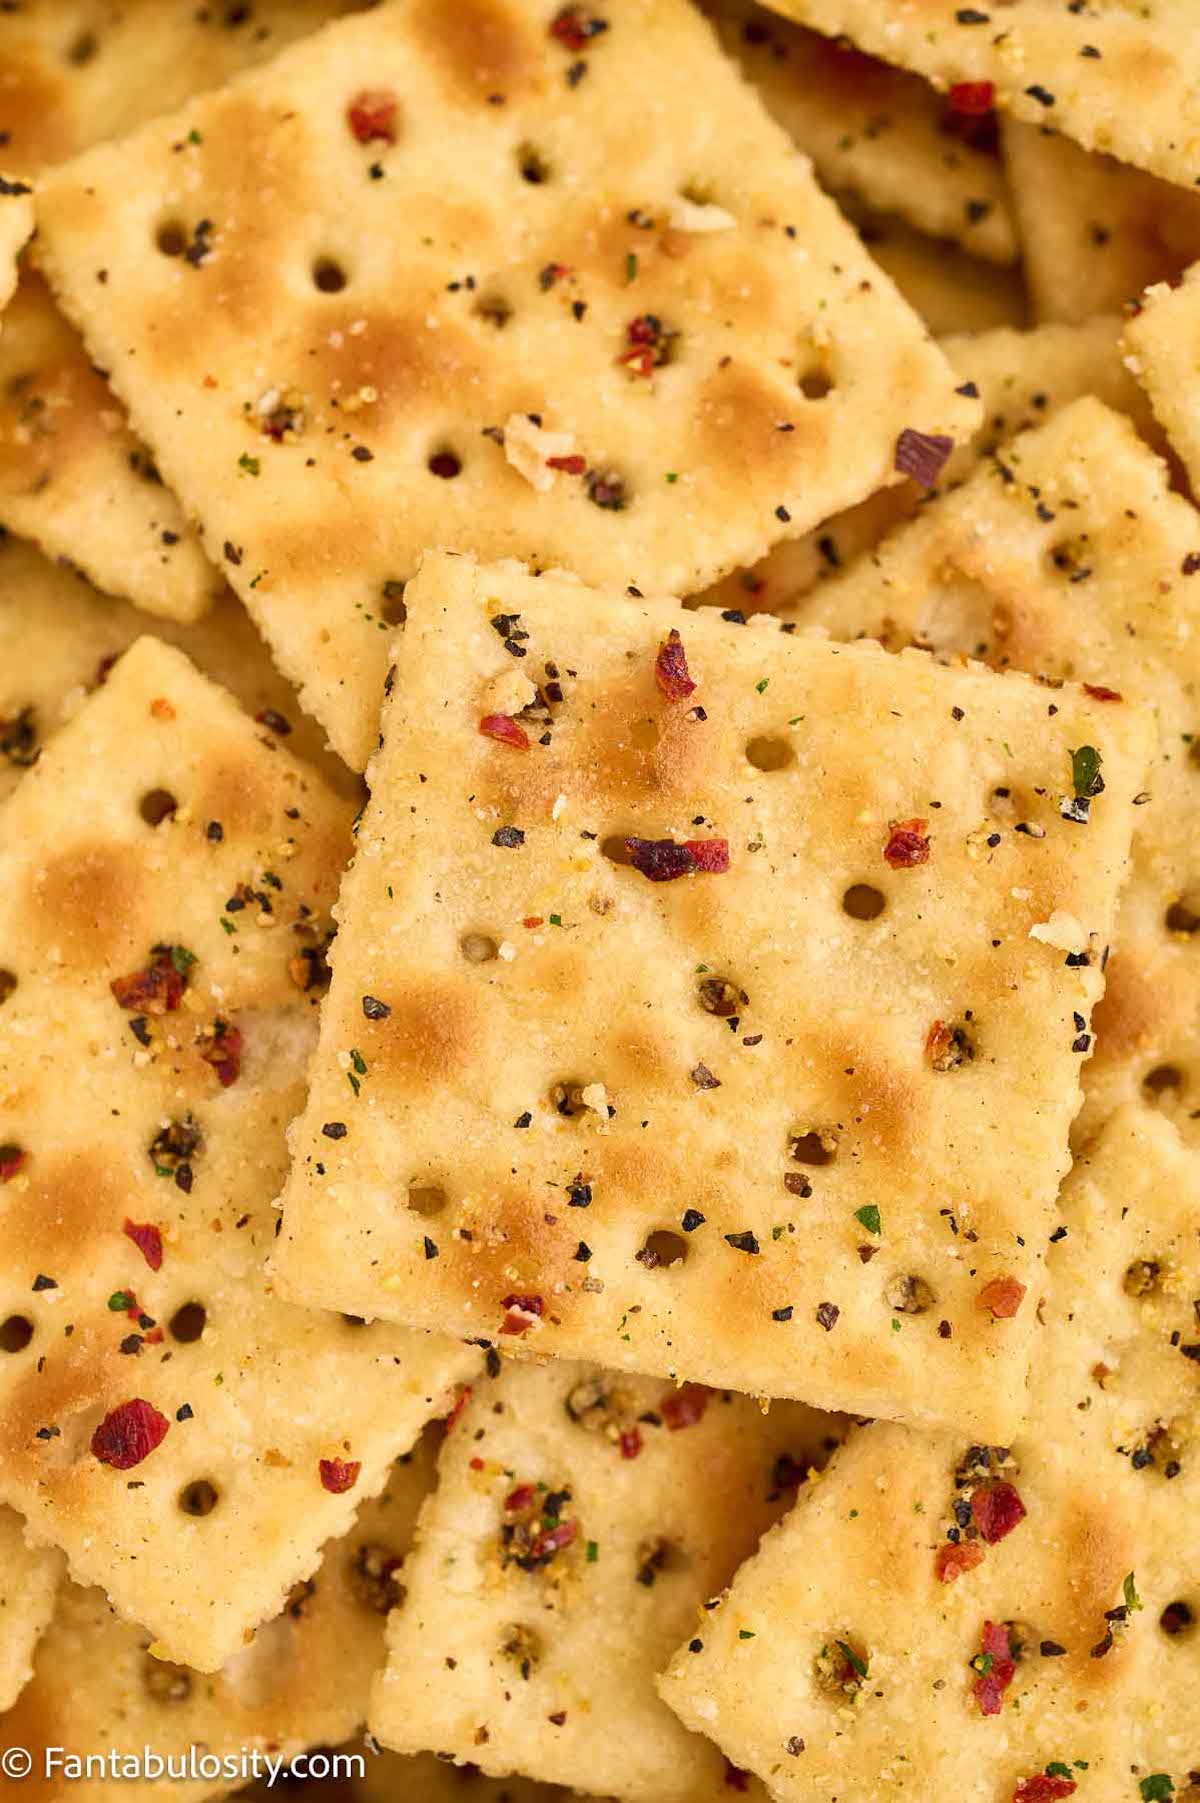 Spicy ranch crackers close-up.